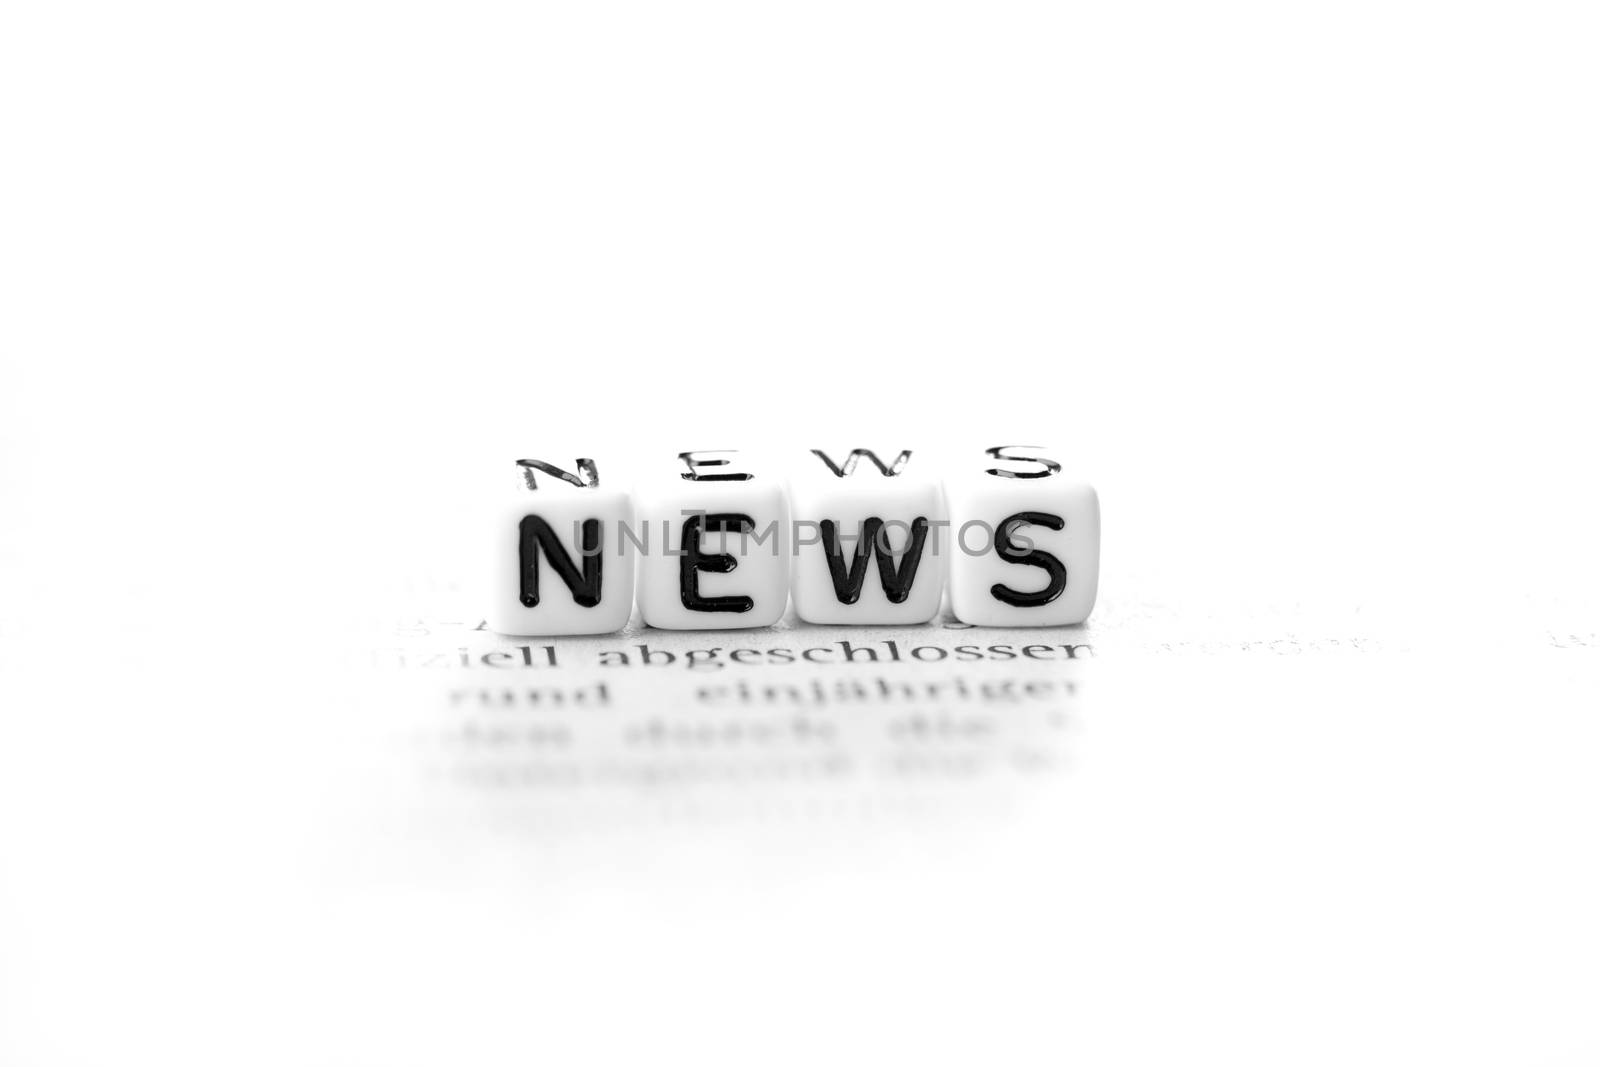 Education News, Newspaper with white background 